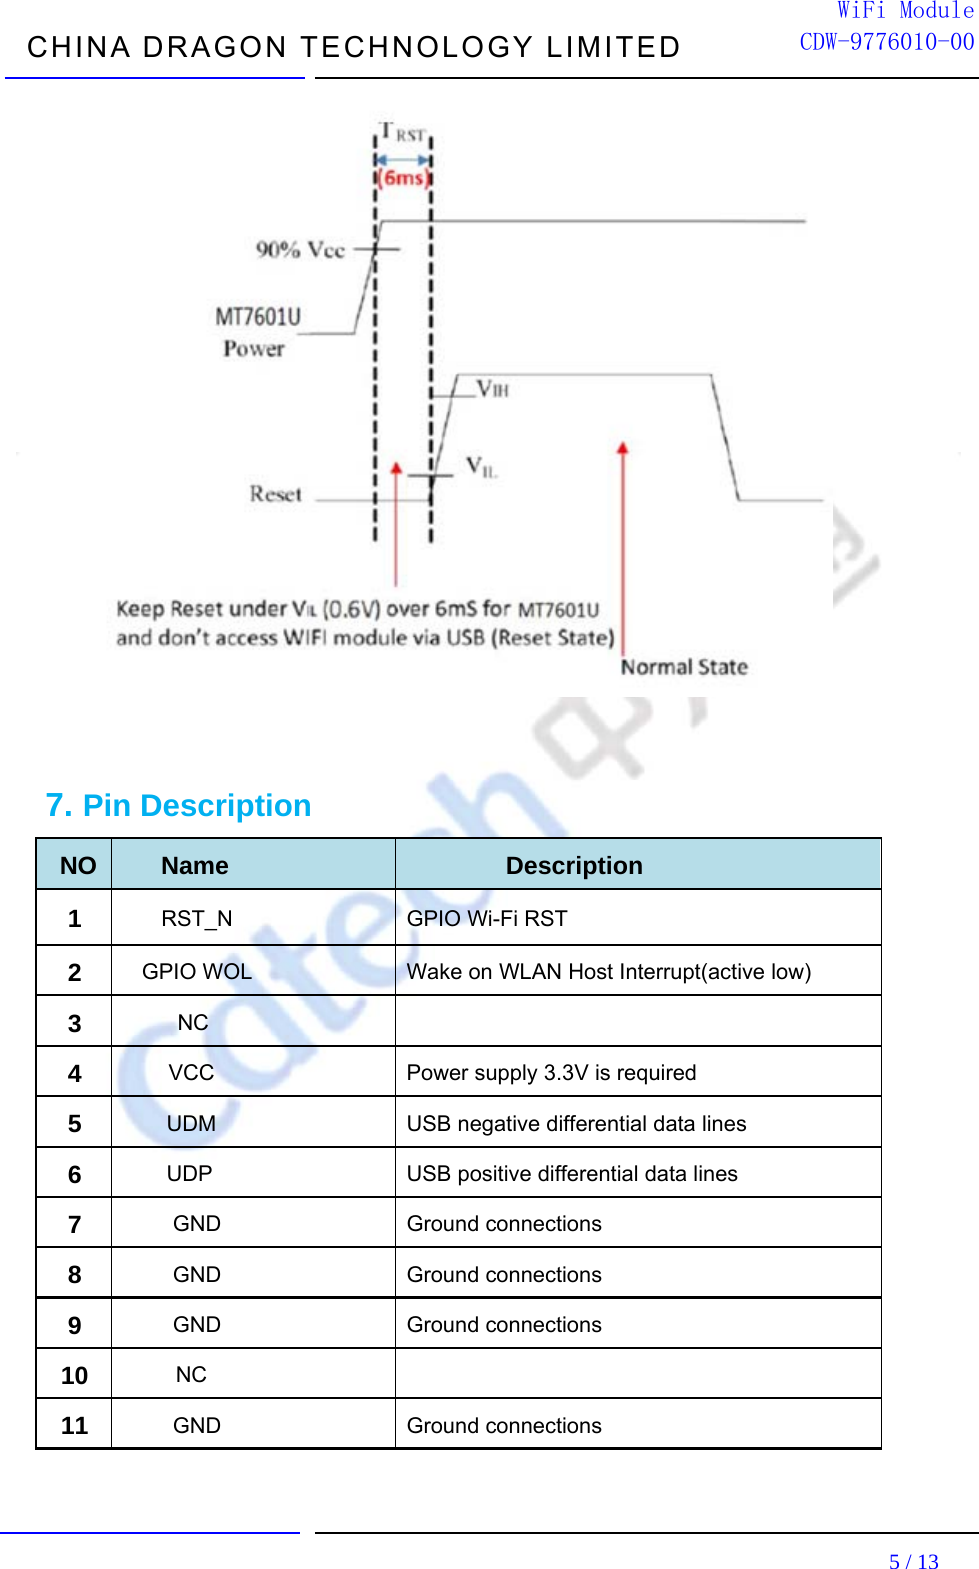  CHINA DRAGON TECHNOLOGY LIMITED                                                                         5 / 13  WiFi ModuleCDW-9776010-00  7. Pin Description NO Name Description 1  RST_N   GPIO Wi-Fi RST 2   GPIO WOL    Wake on WLAN Host Interrupt(active low) 3 NC   4 VCC    Power supply 3.3V is required 5  UDM    USB negative differential data lines 6  UDP    USB positive differential data lines 7  GND   Ground connections 8   GND   Ground connections 9   GND   Ground connections 10  NC  11   GND   Ground connections                   